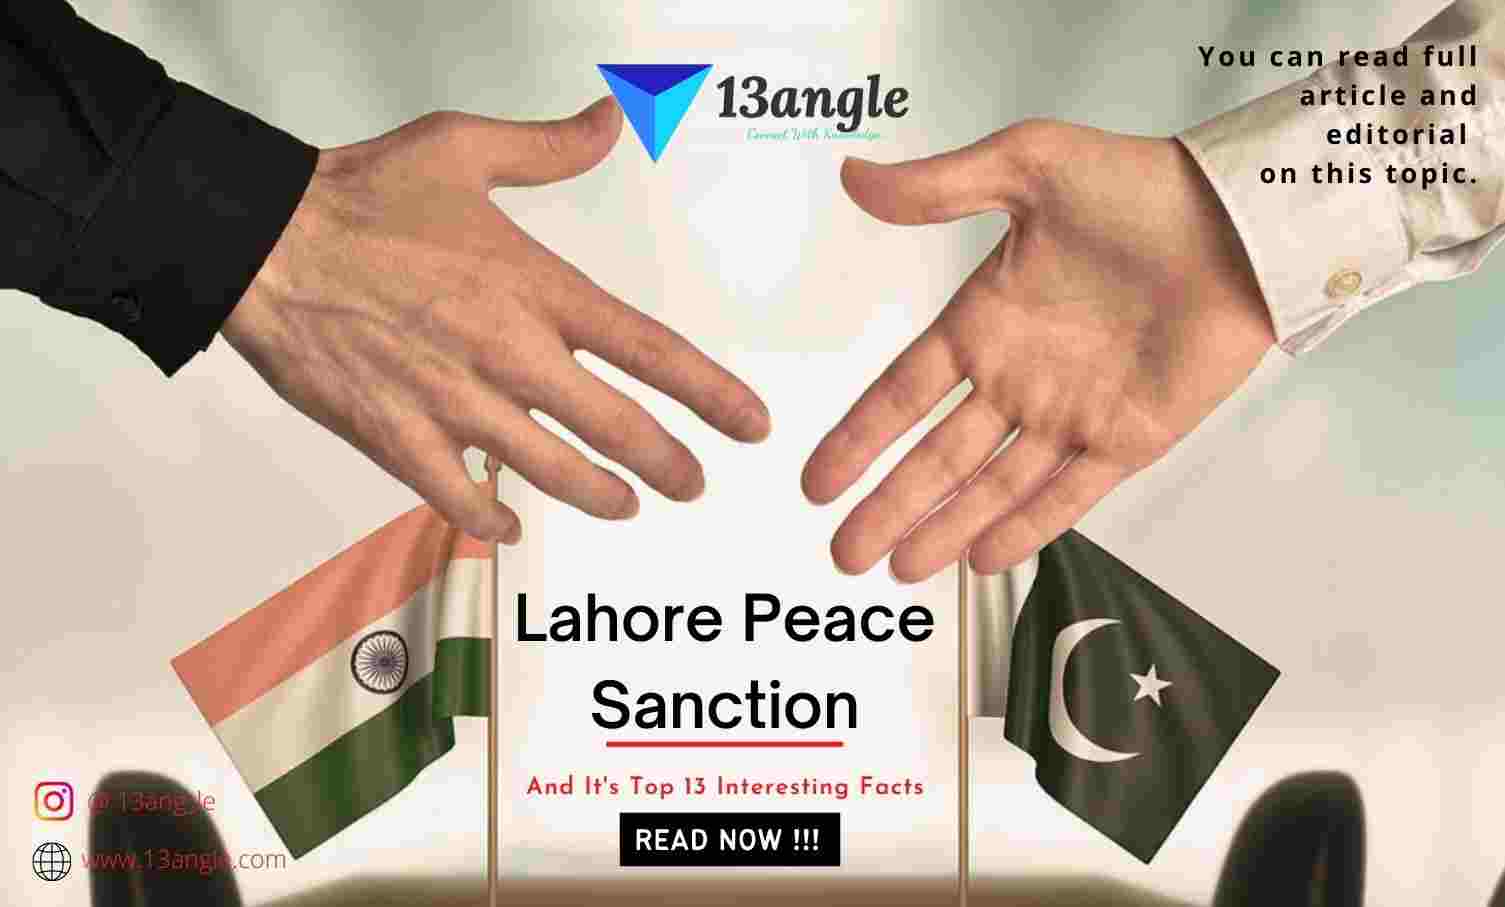 Lahore Peace Sanction And It's Top 13 Interesting Facts- 13angle.com